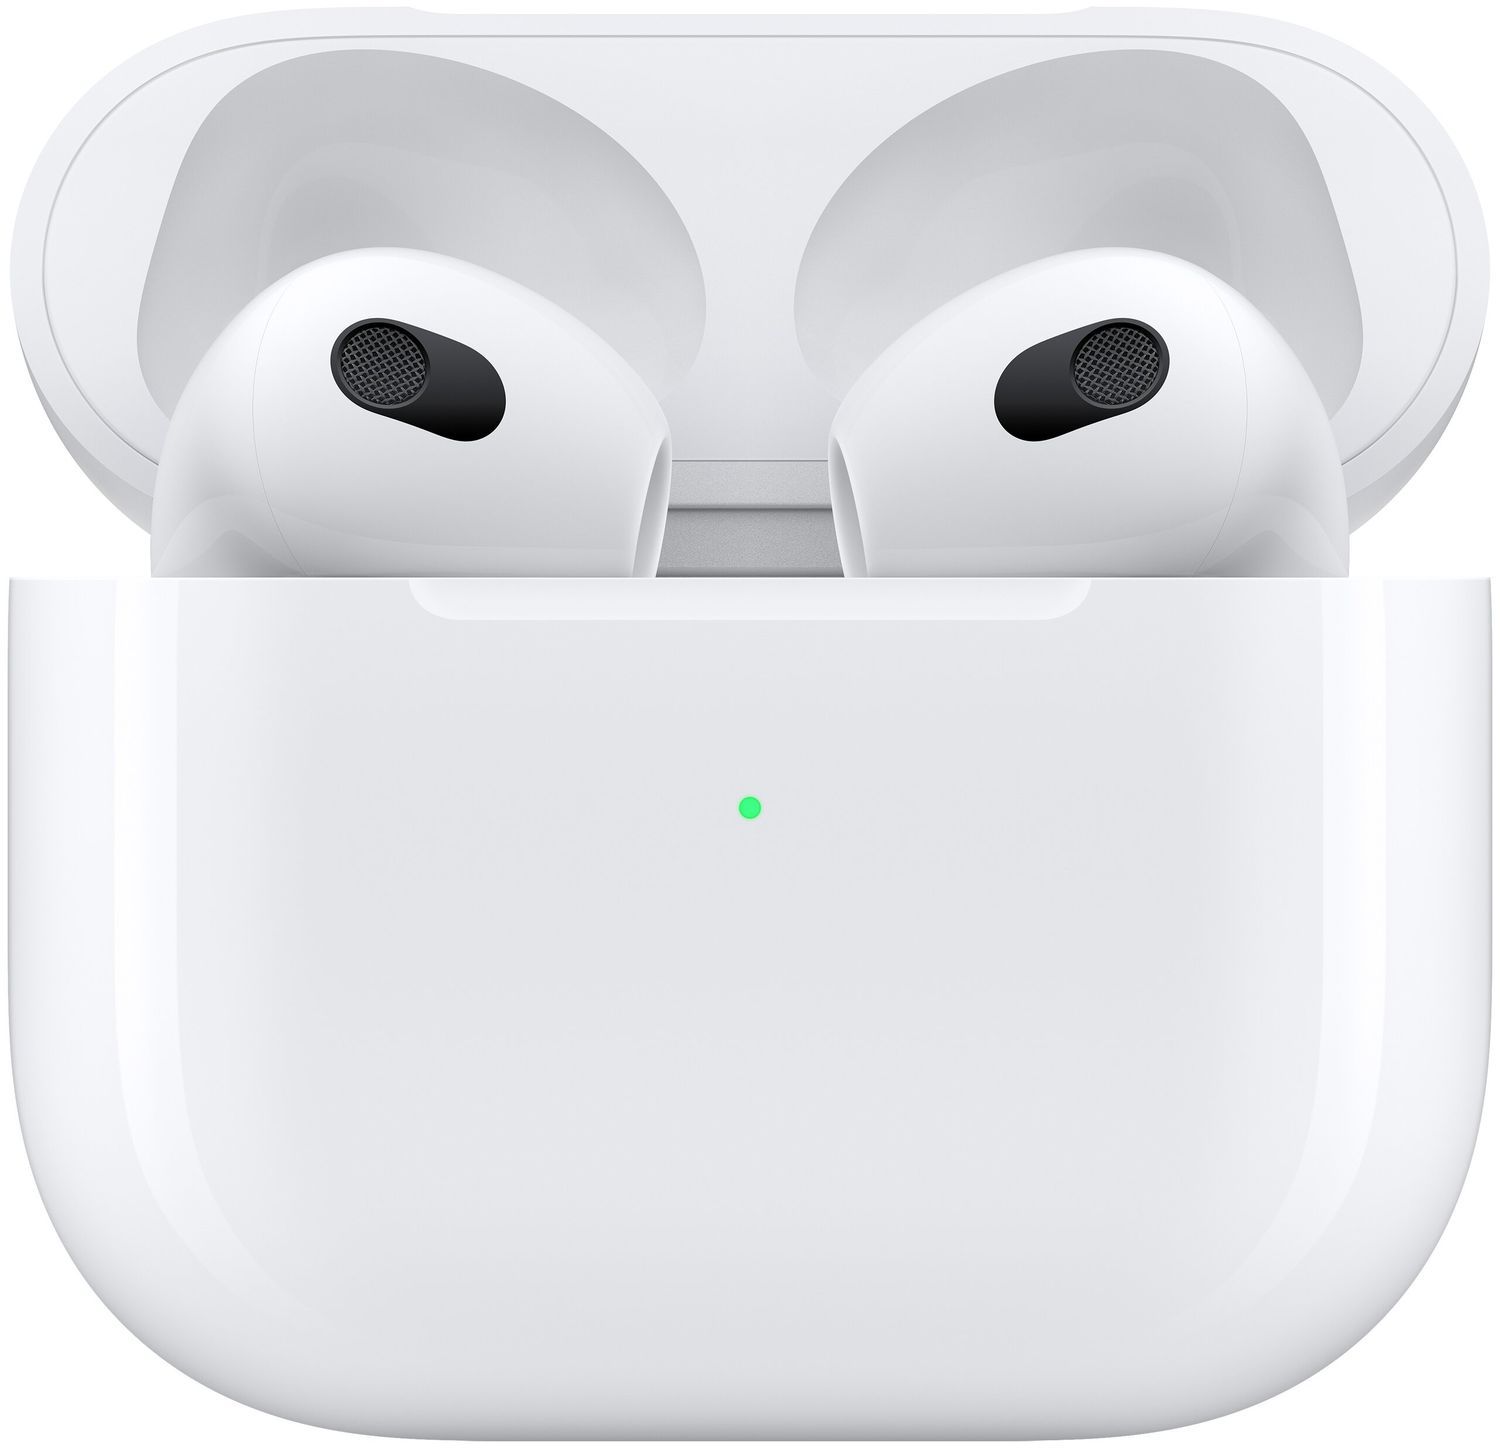 Наушники Apple AirPods 3 MagSafe Charging Case, белый MME73 беспроводные наушники apple airpods pro 2nd generation magsafe charging case белые